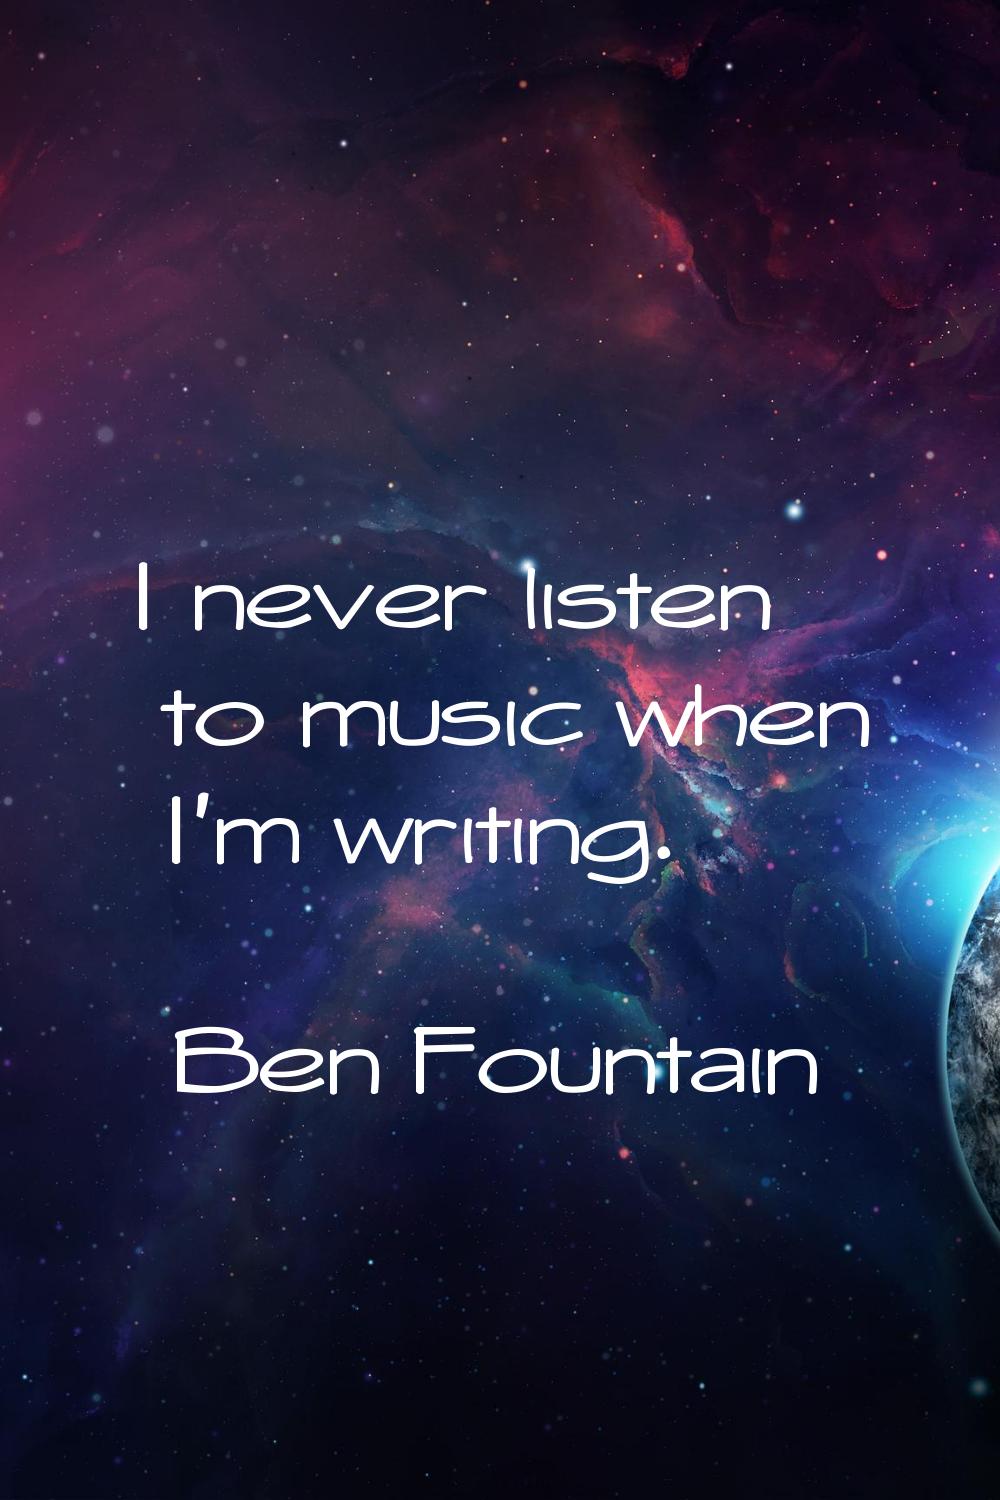 I never listen to music when I'm writing.